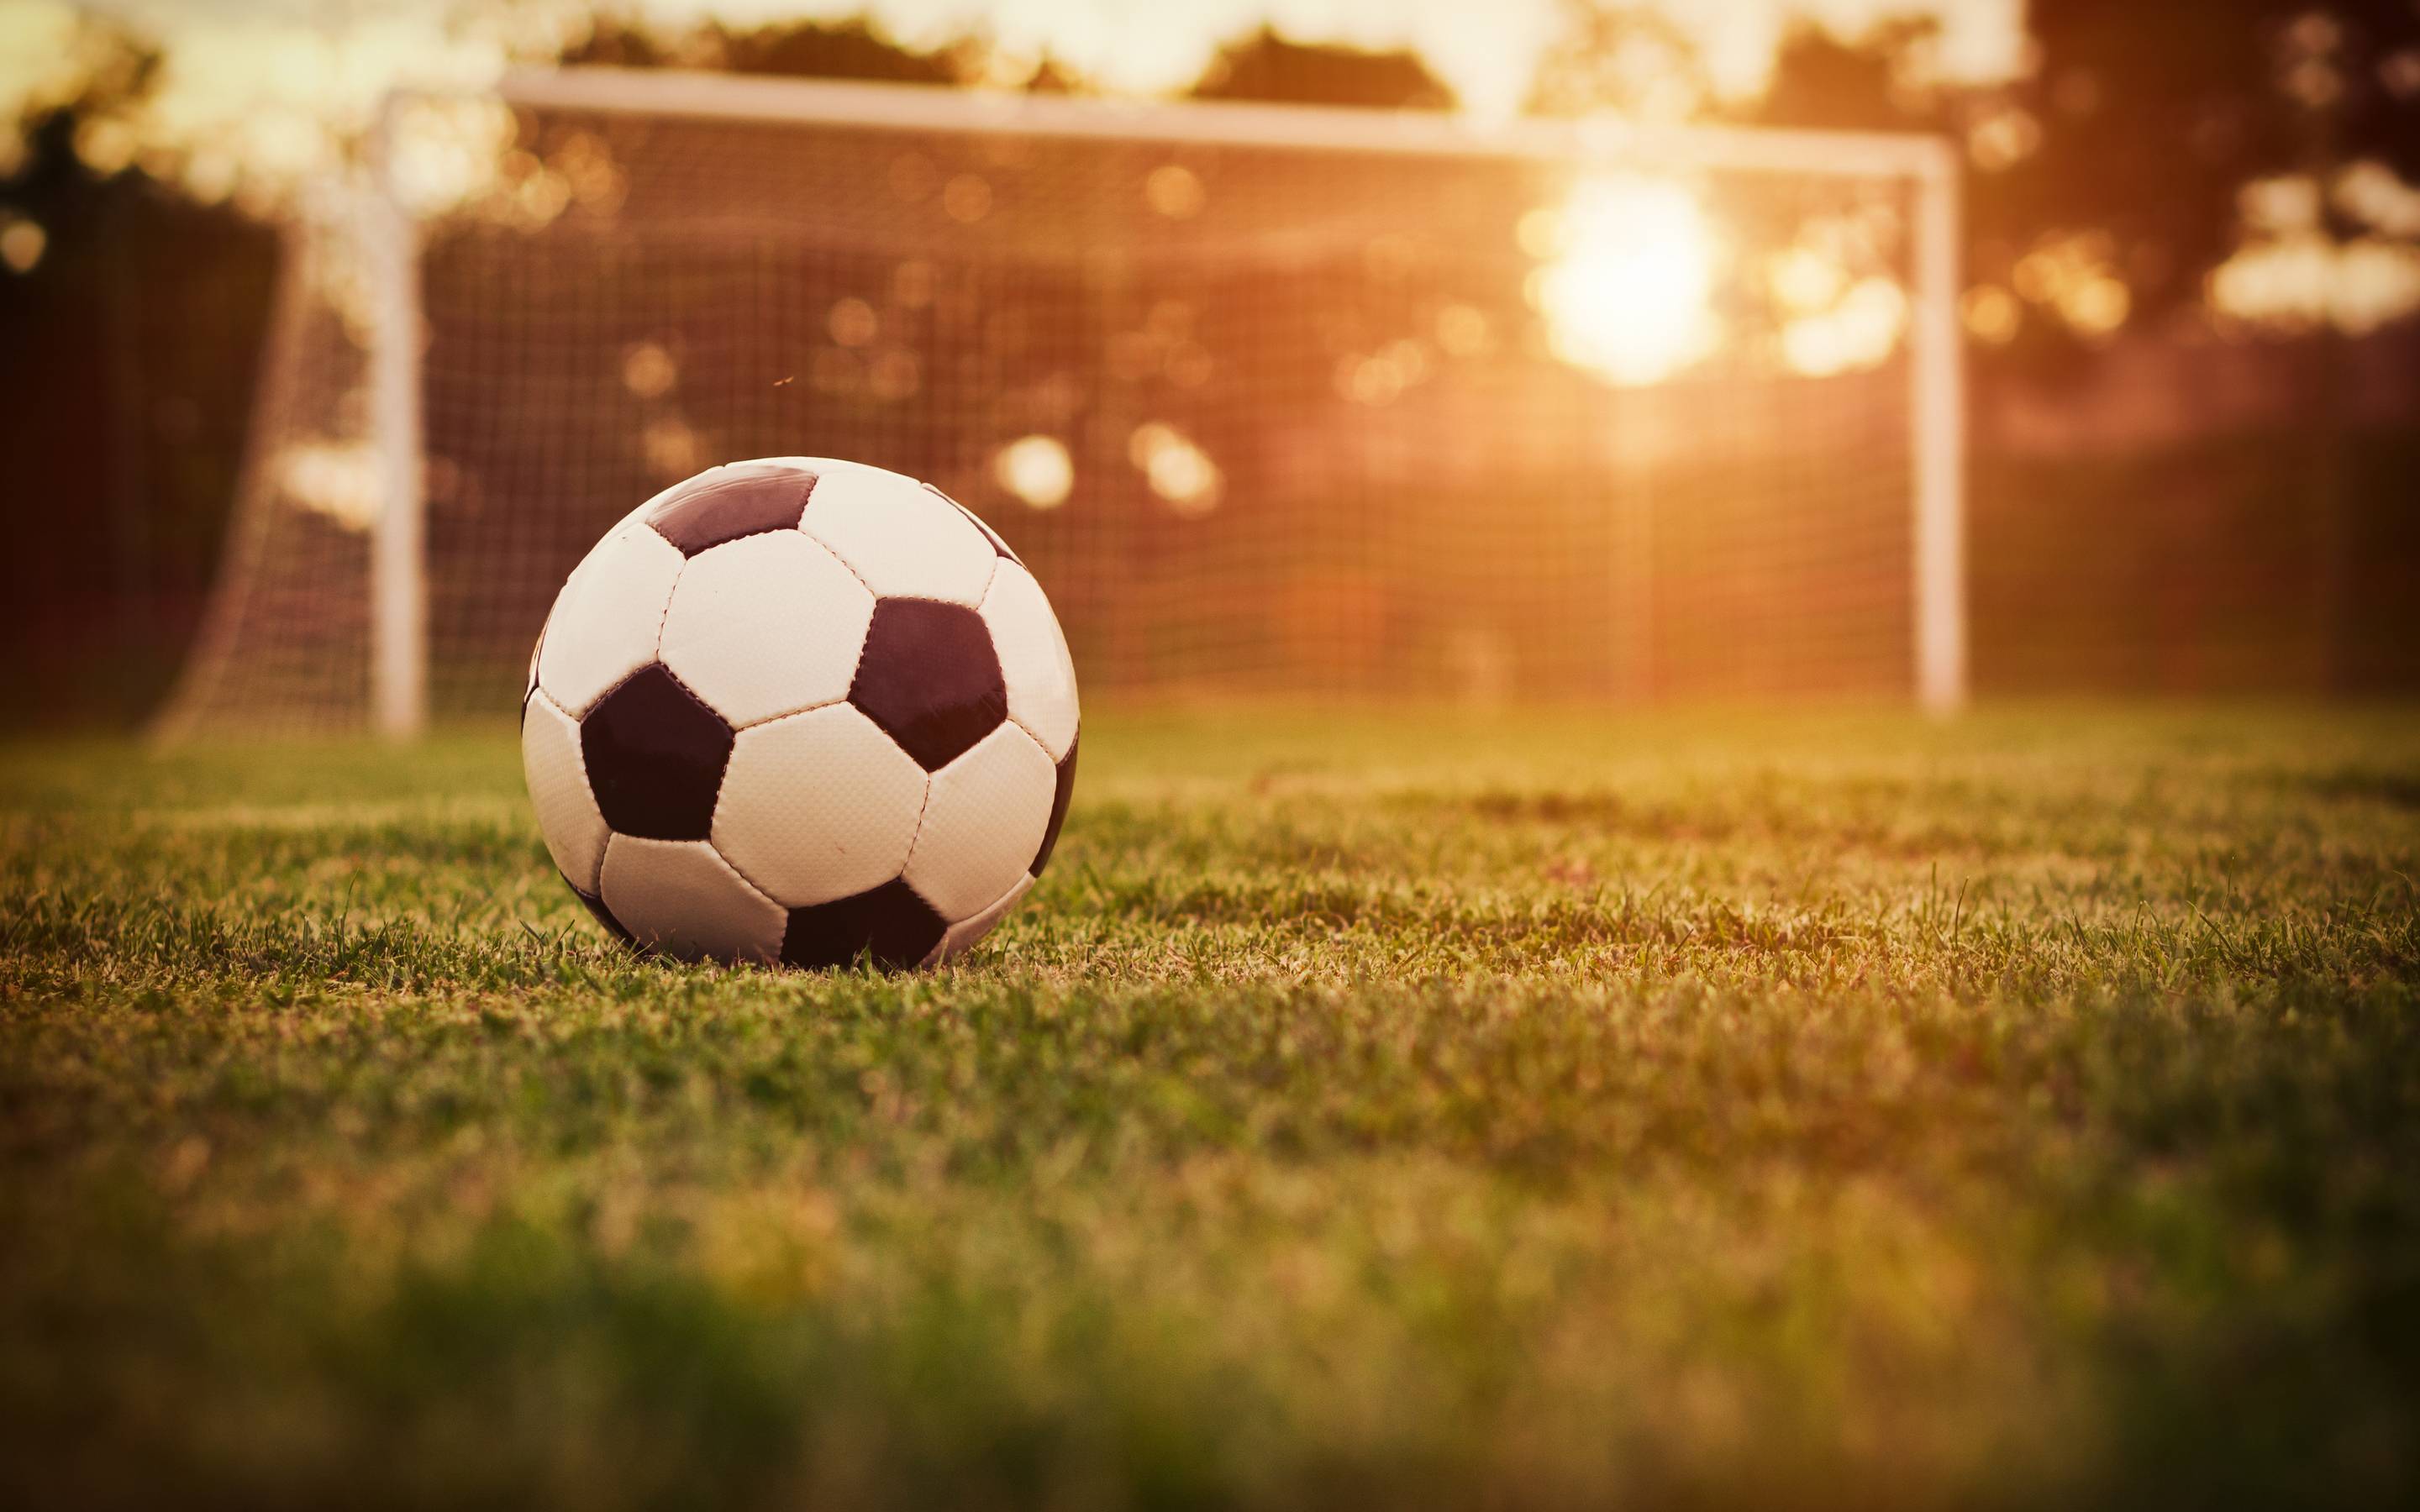 A soccer ball on a field with the sun setting in the background. - Soccer